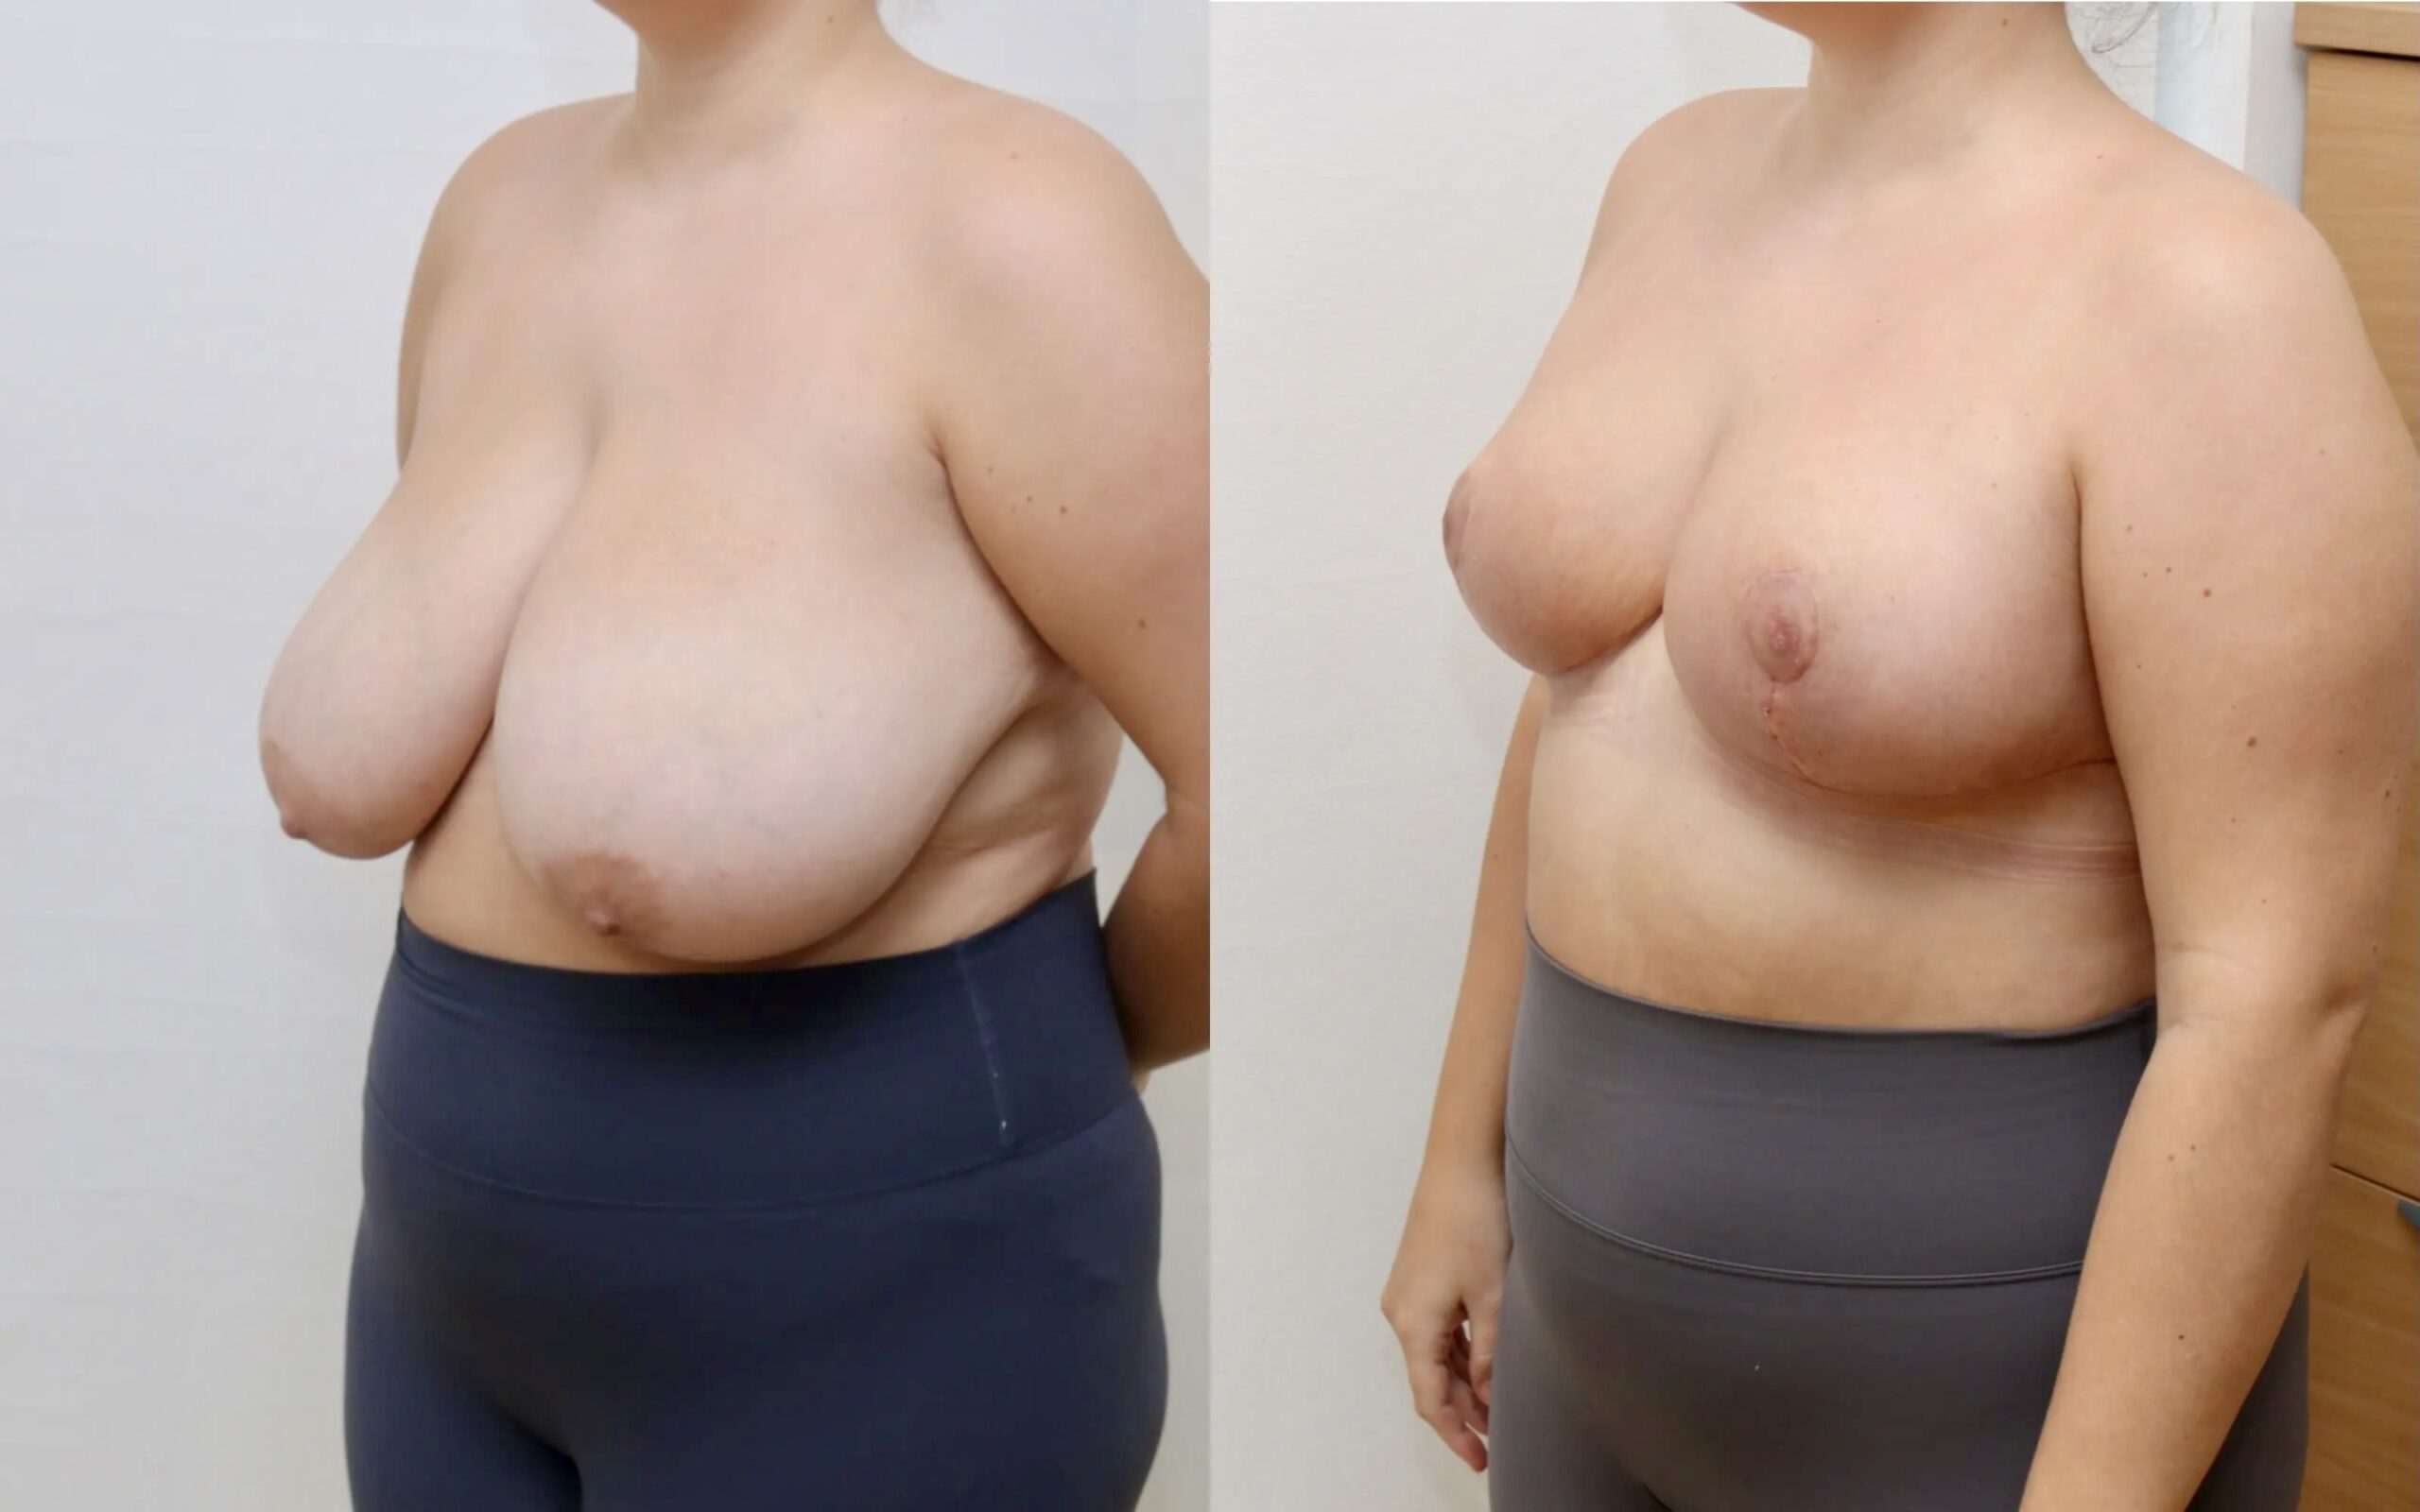 breast reduction before and after 4 weeks